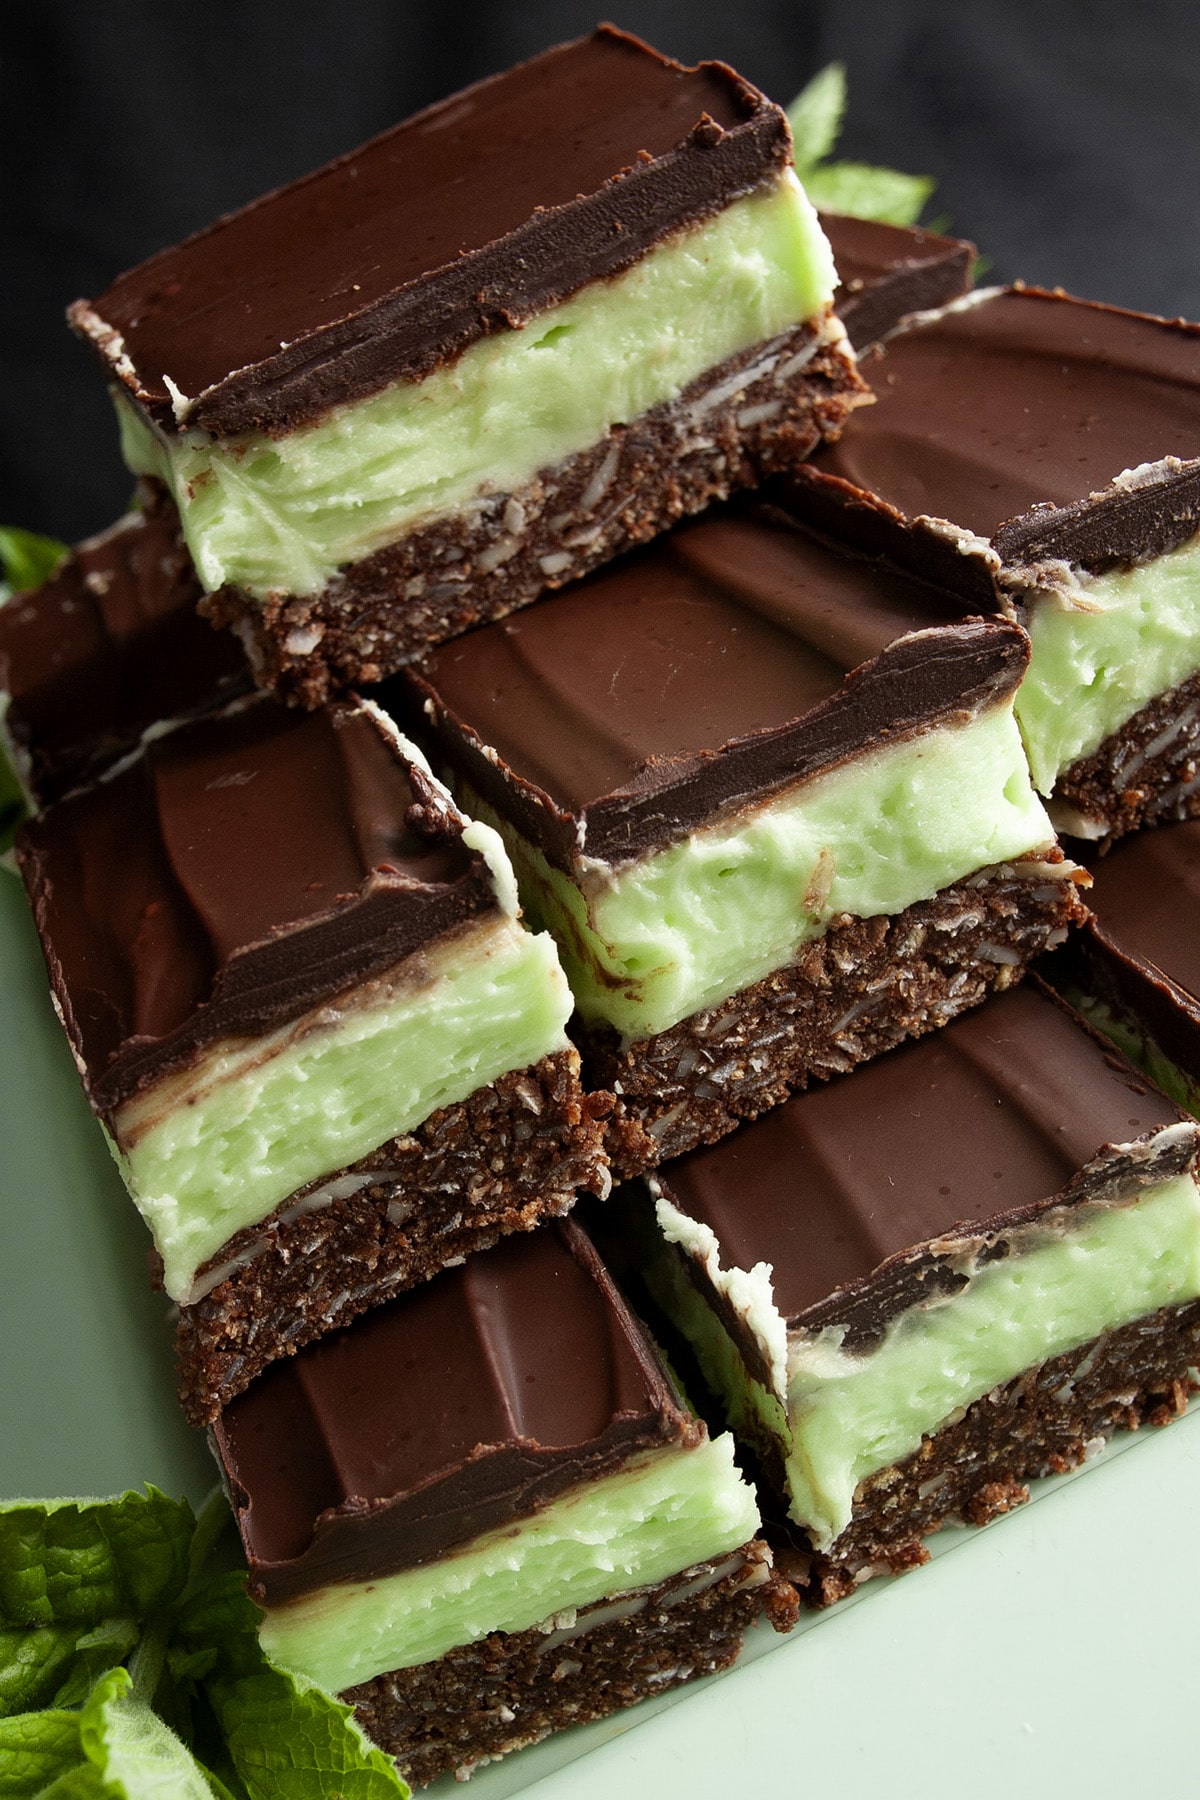 Close up view of a plate of Creme de Menthe Nanaimo Bars - a 3 layered bar. The top and bottom layers are chocolate, and the middle layer is a green buttercream. They are on a green plate, garnished with a sprig of fresh mint.